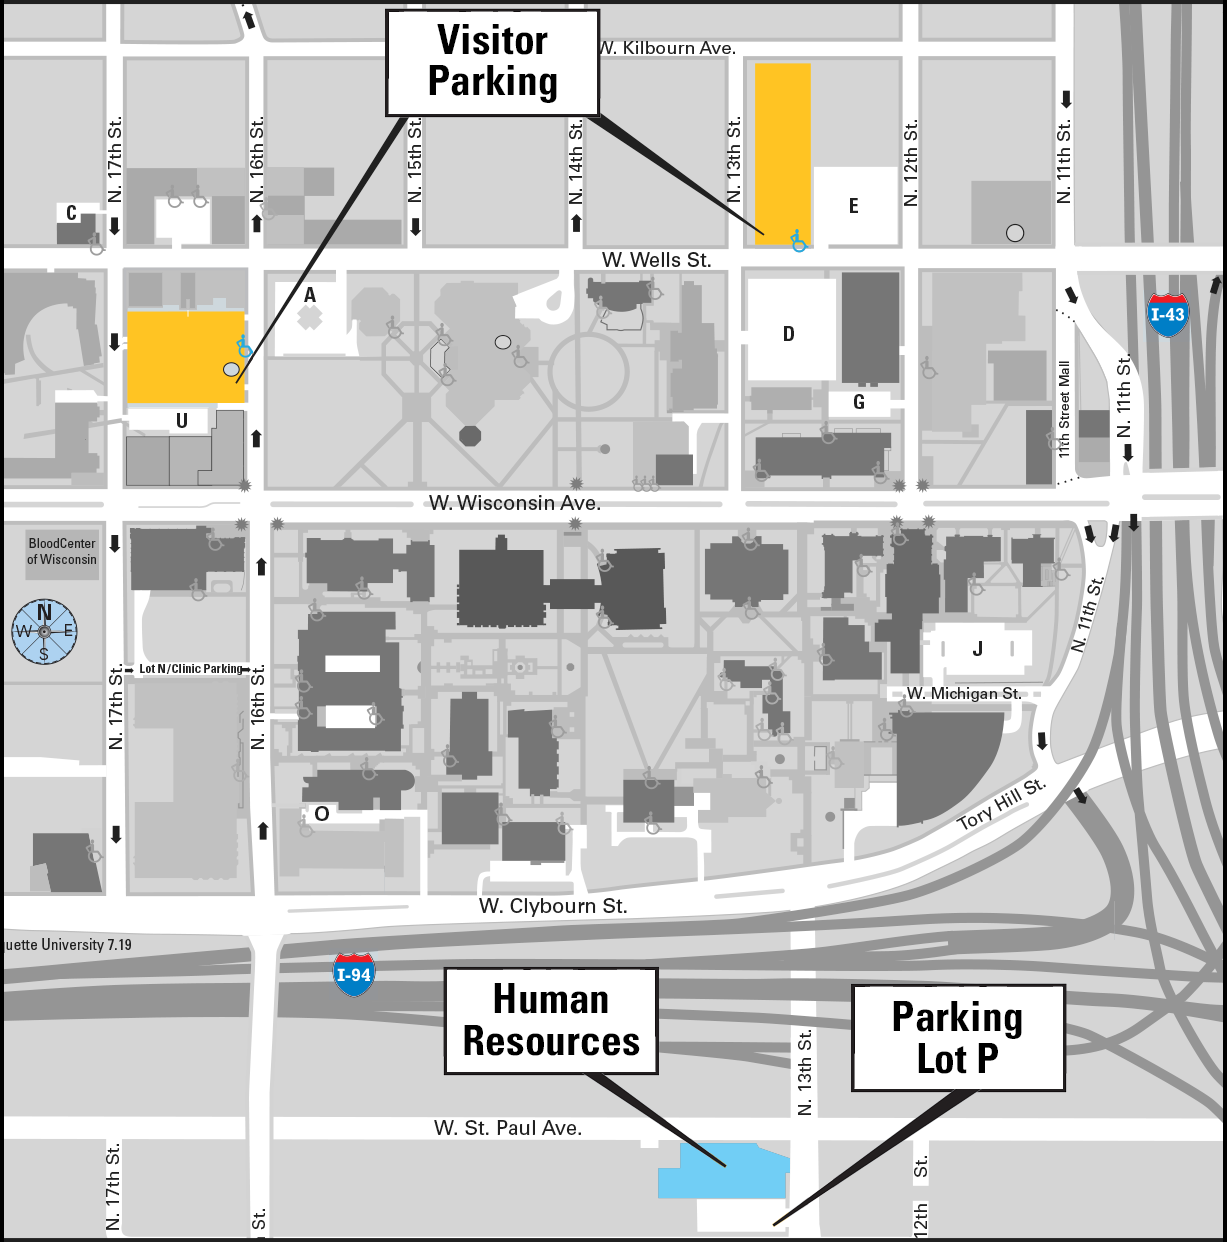 Campus map showing Human Resources location and parking lots